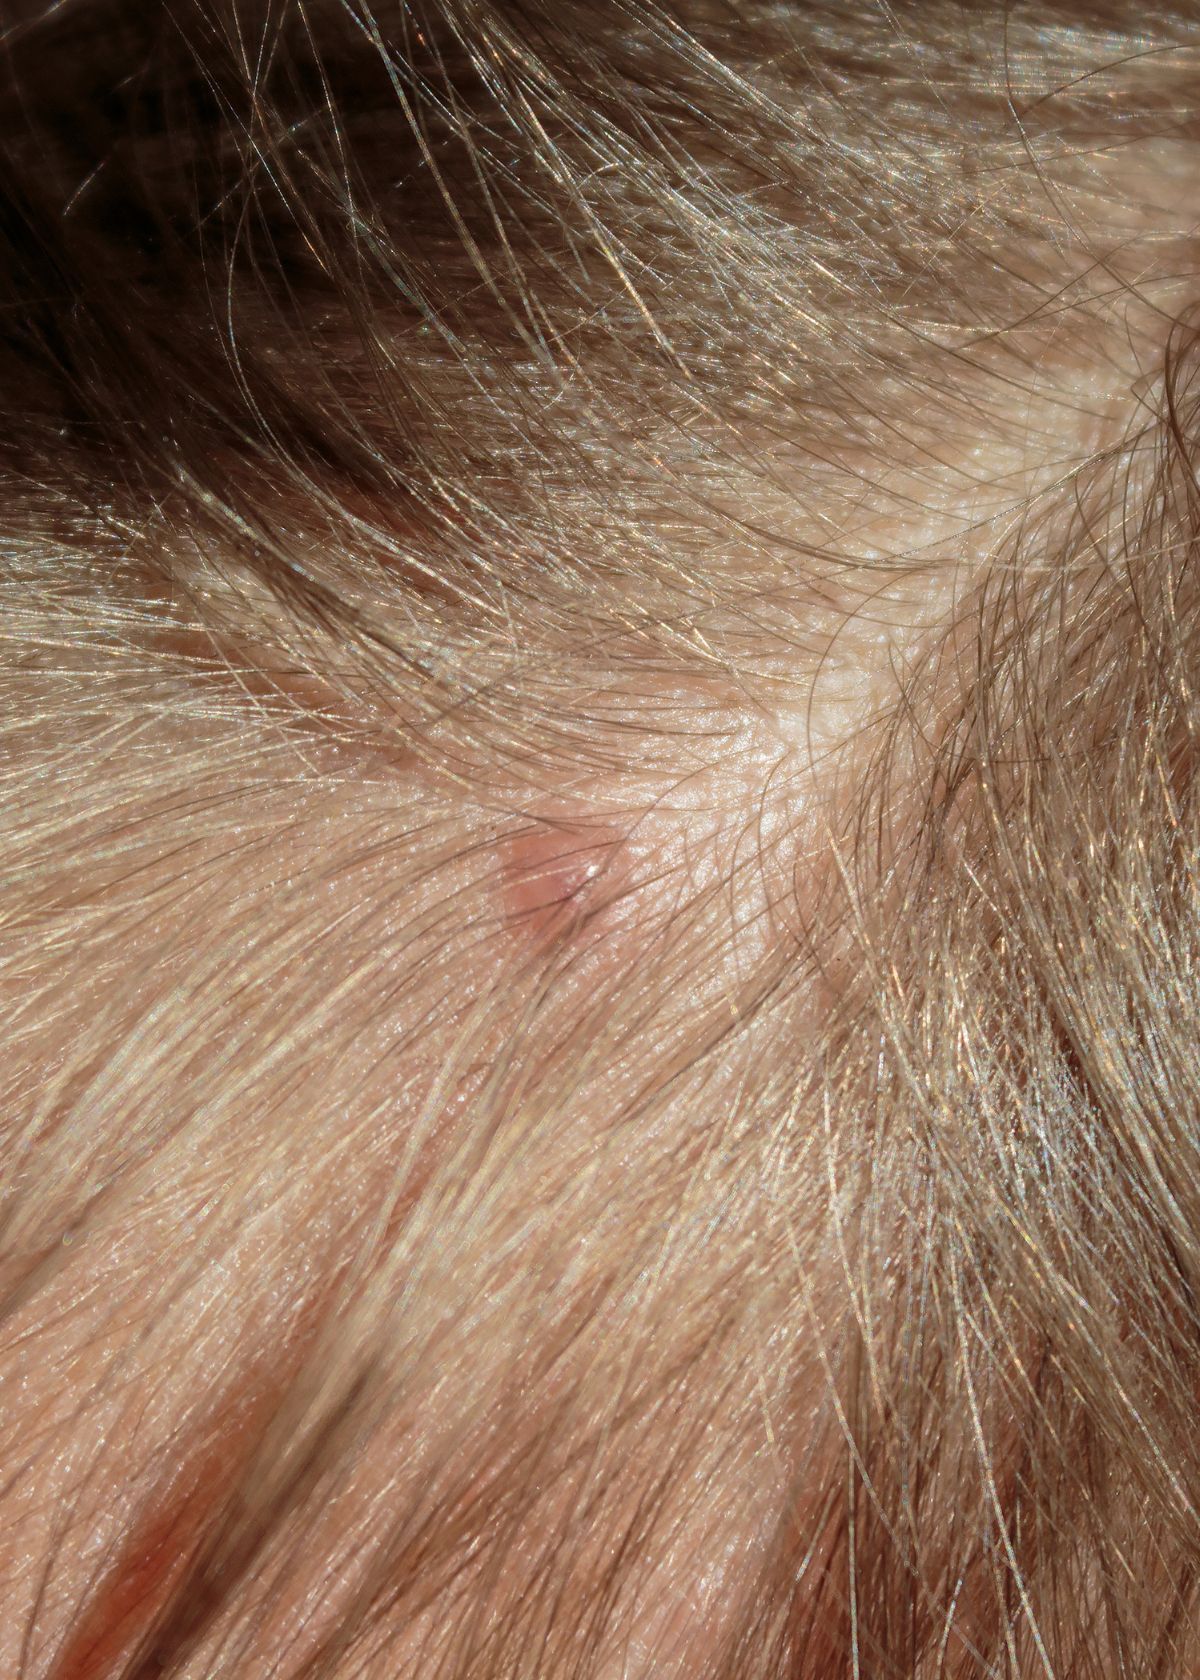 Why Am I Getting Pimples On My Scalp?